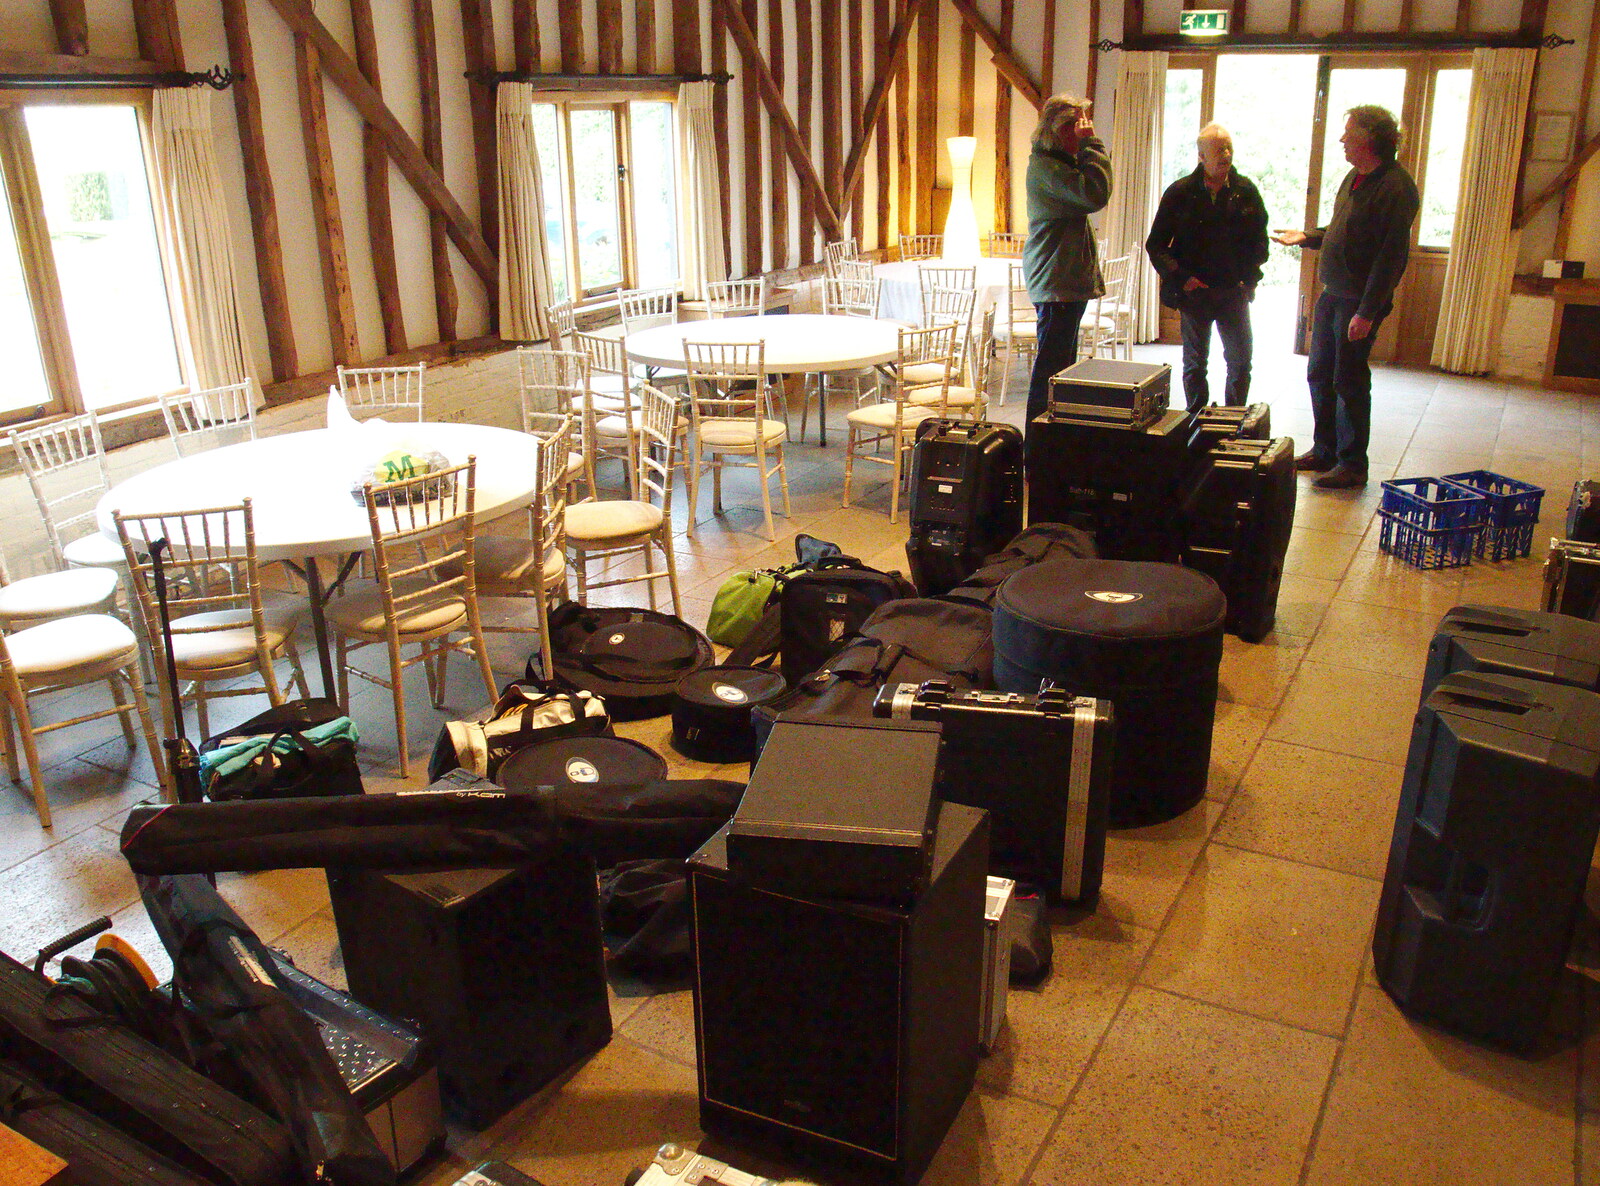 The band's gear all laid out from The BBs Play Haughley Park Barn, Haughley, Suffolk - 26th April 2014